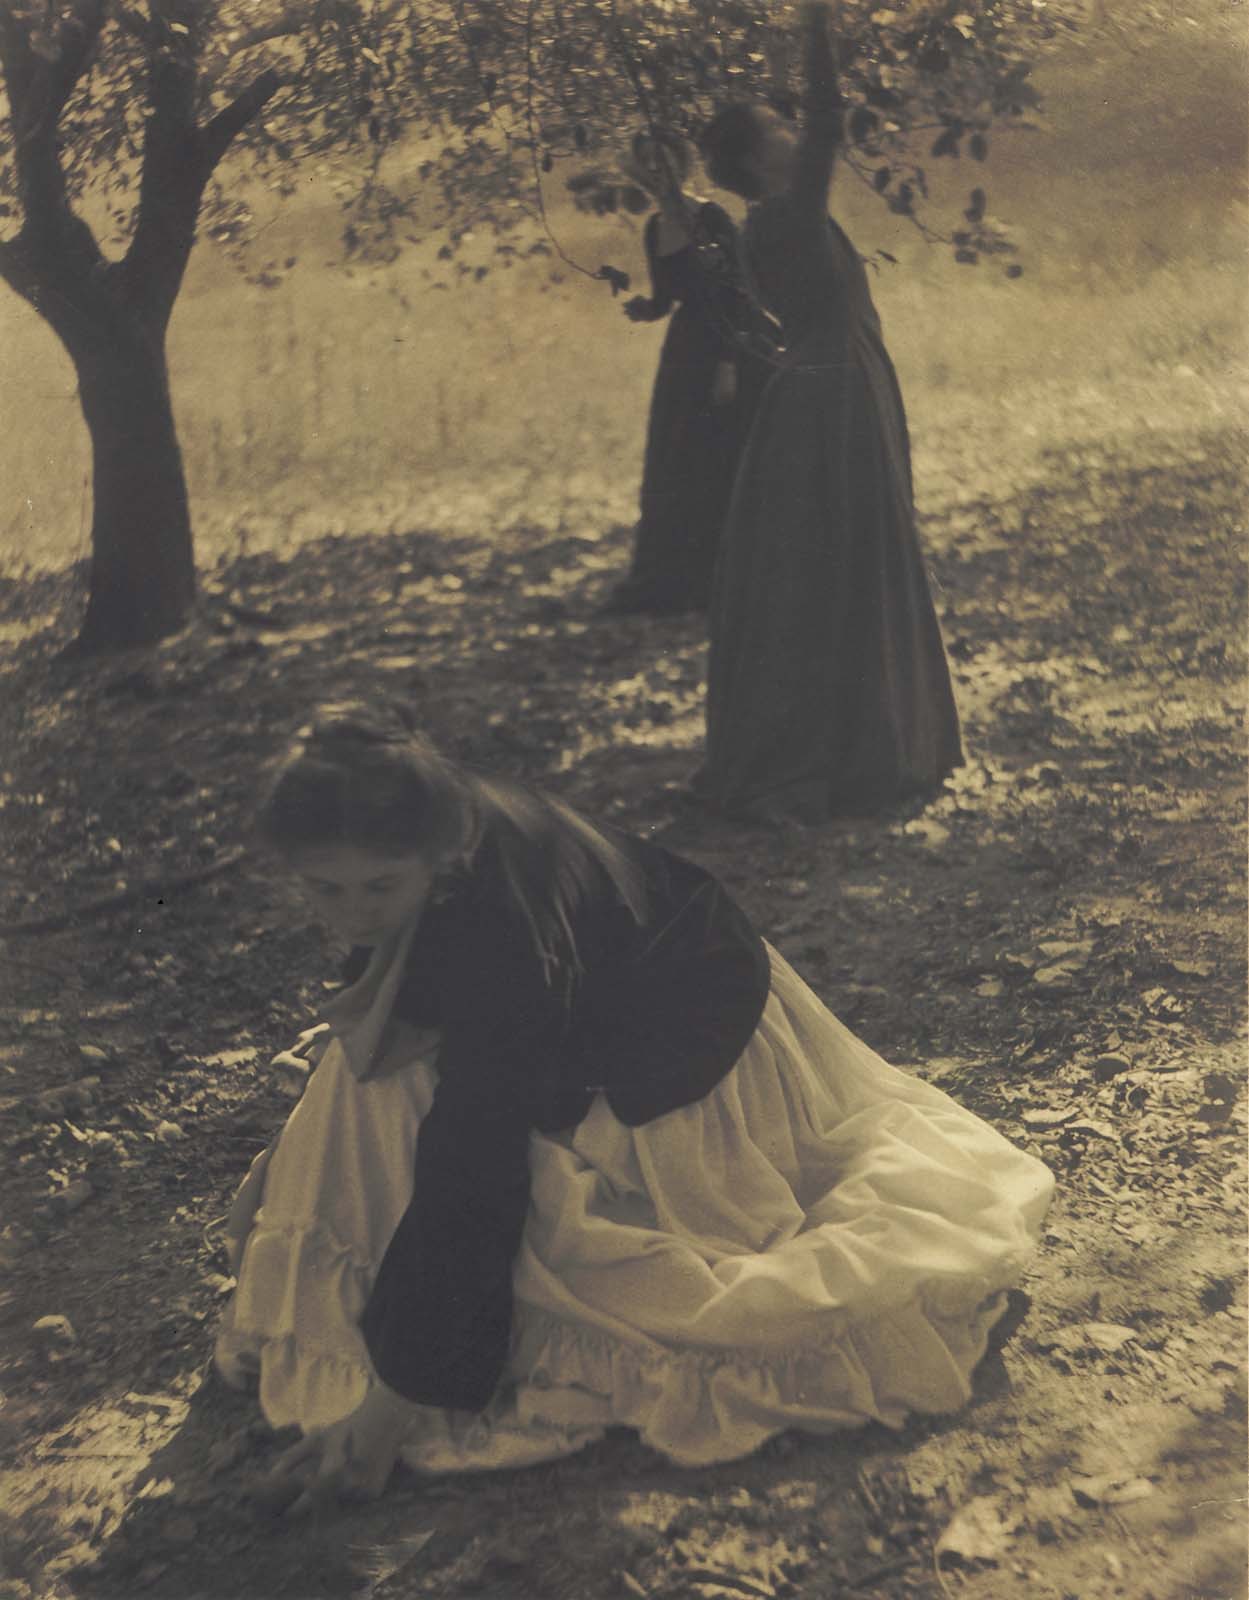 heaveninawildflower:
“ ‘The Orchard’ (1902). Palladium print by Clarence H. White (1871–1925).
Image and text courtesy MFA Boston.
”